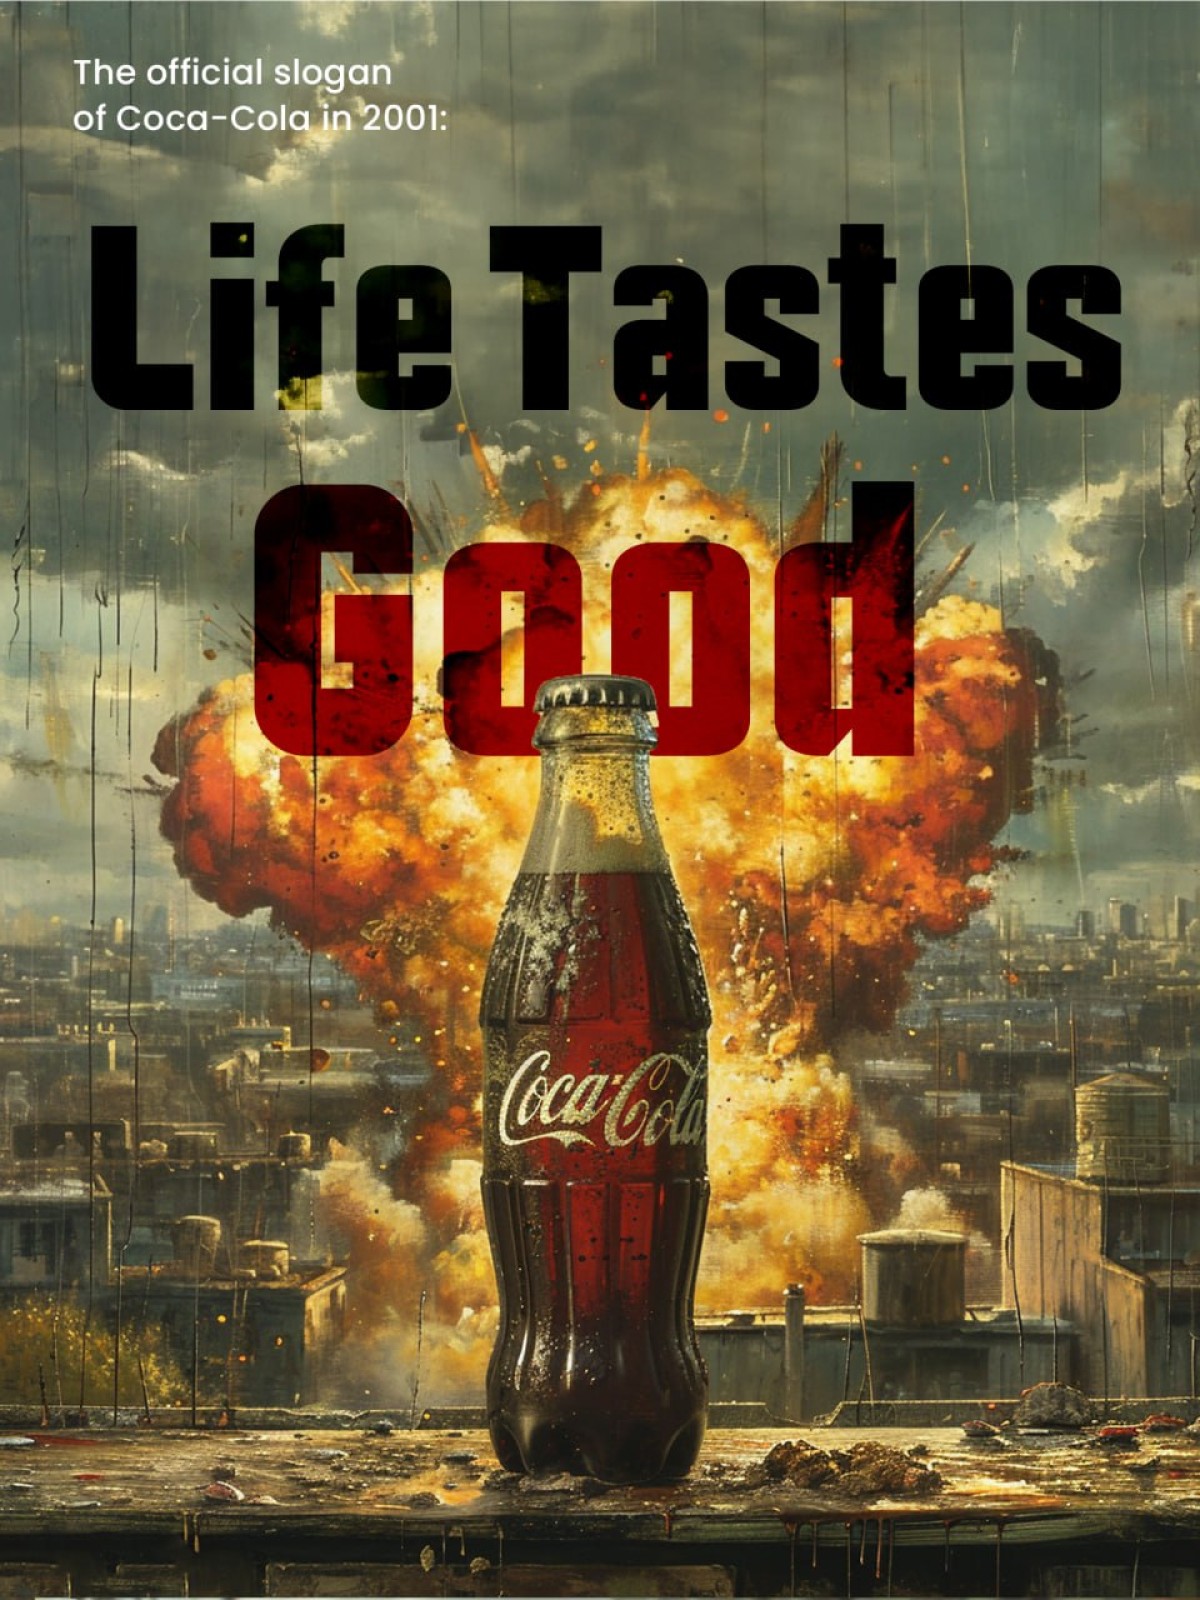 The official slogan of Coca-Cola in 2001